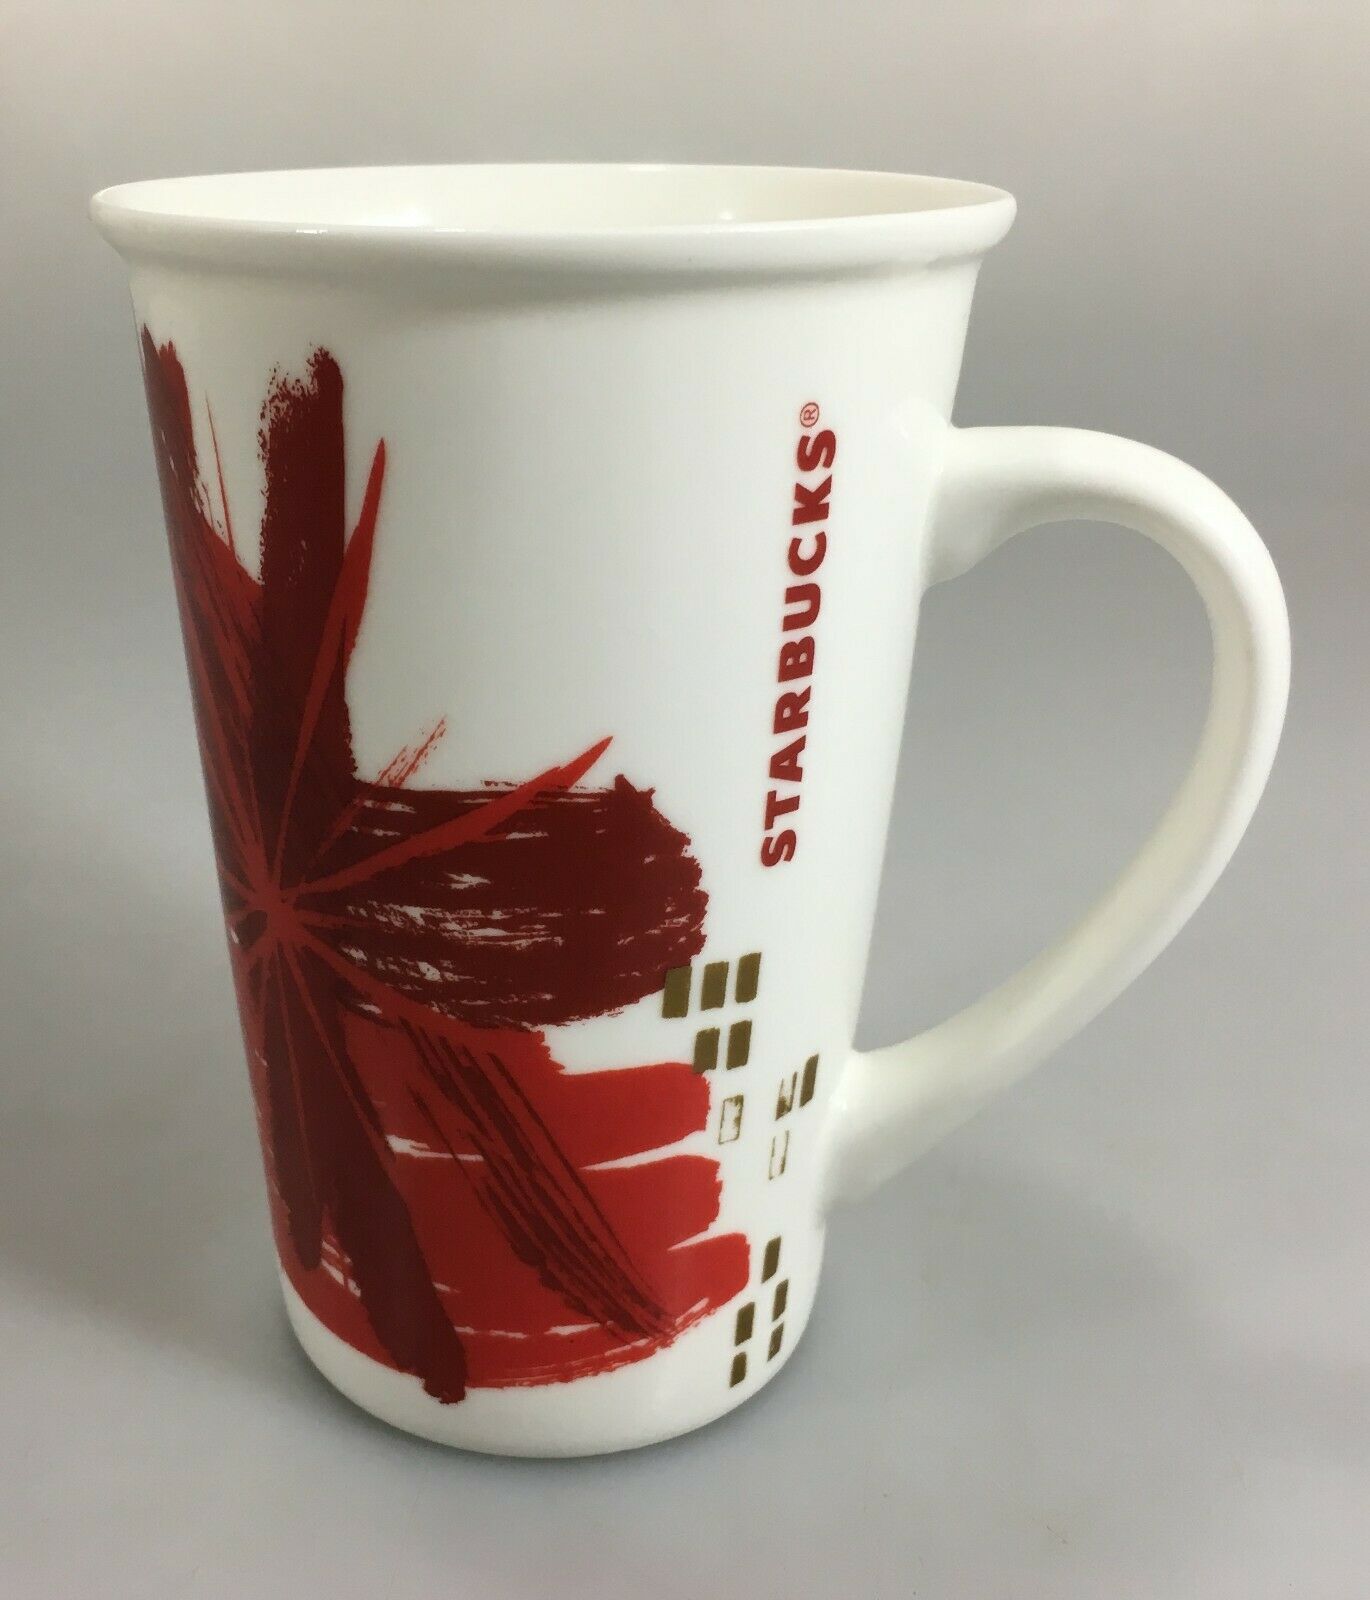 Starbucks Red Splashes Gold Accents Tall 12 Ounce Coffee Mug 2014